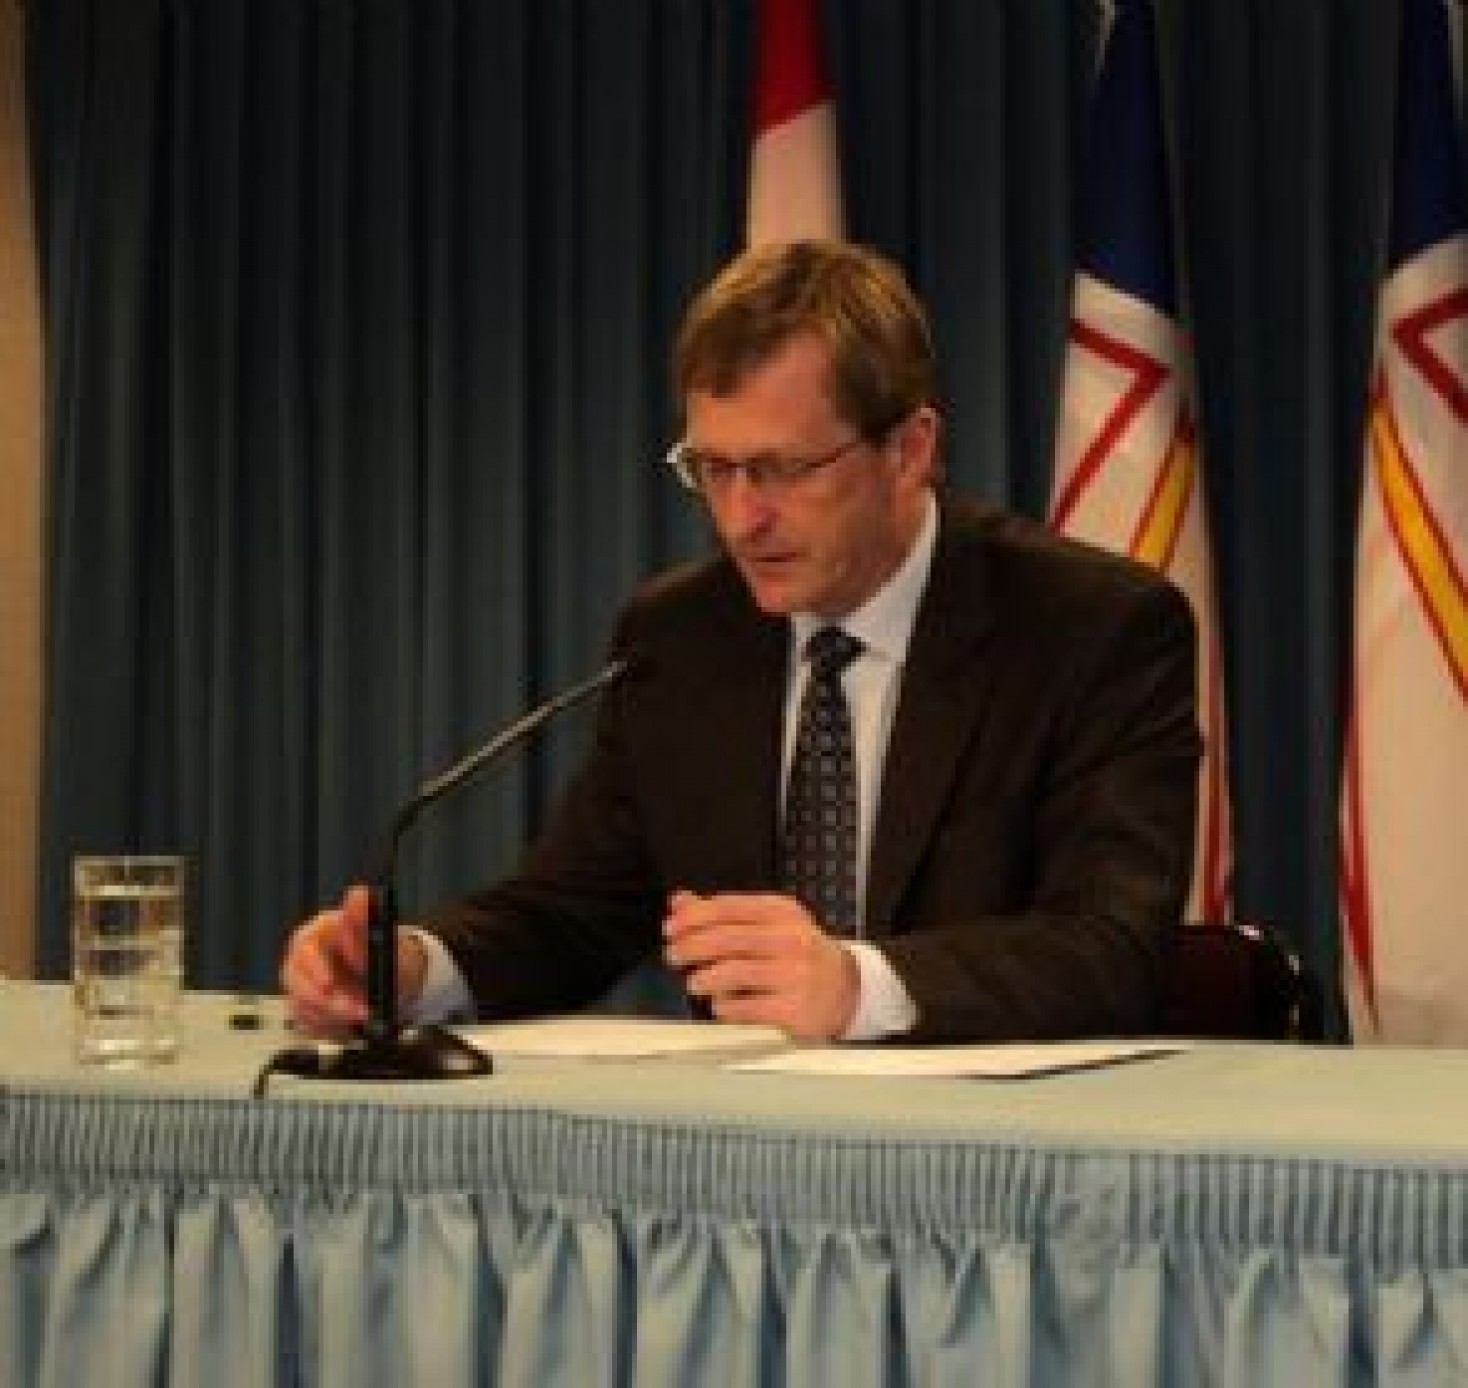 NLEC asks government to reduce spending and restructure pensions at pre-budget consultations